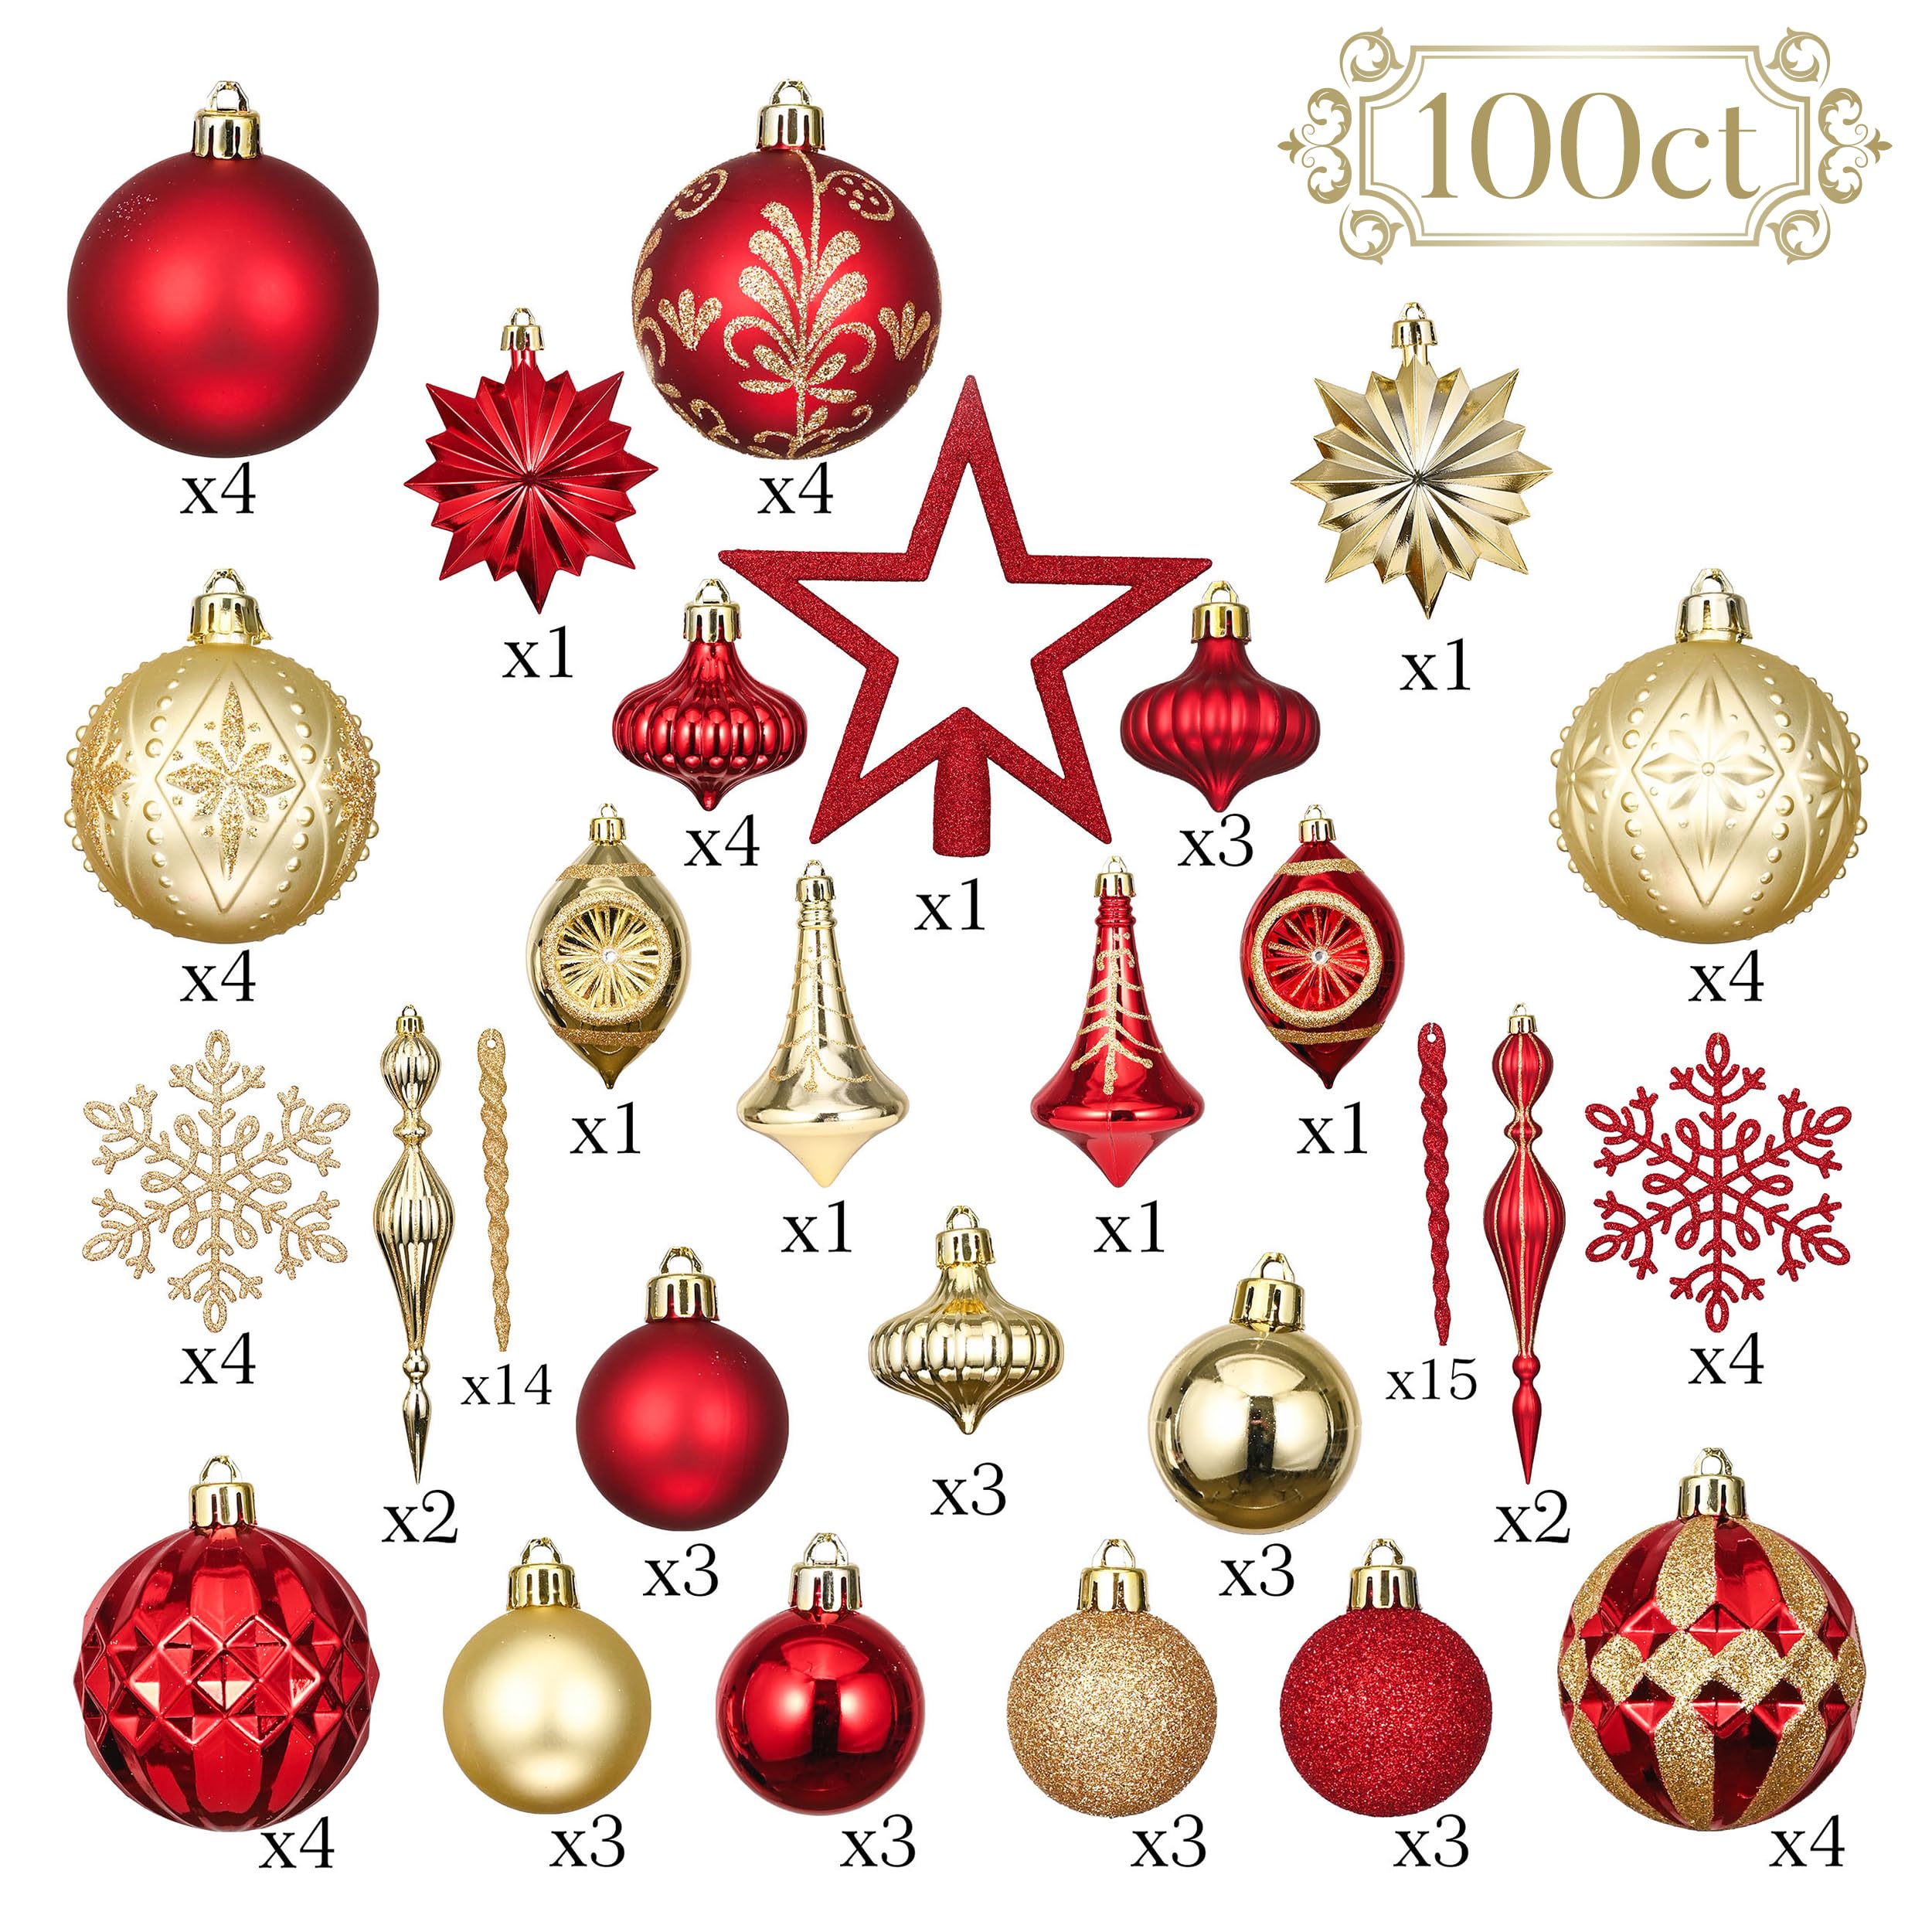 Valery Madelyn Ornaments for Christmas Trees, 100ct Red and Gold Shatterproof Christmas Tree Decorations, Luxury Hanging Ball Ornaments Bulk for Xmas Holiday Decor